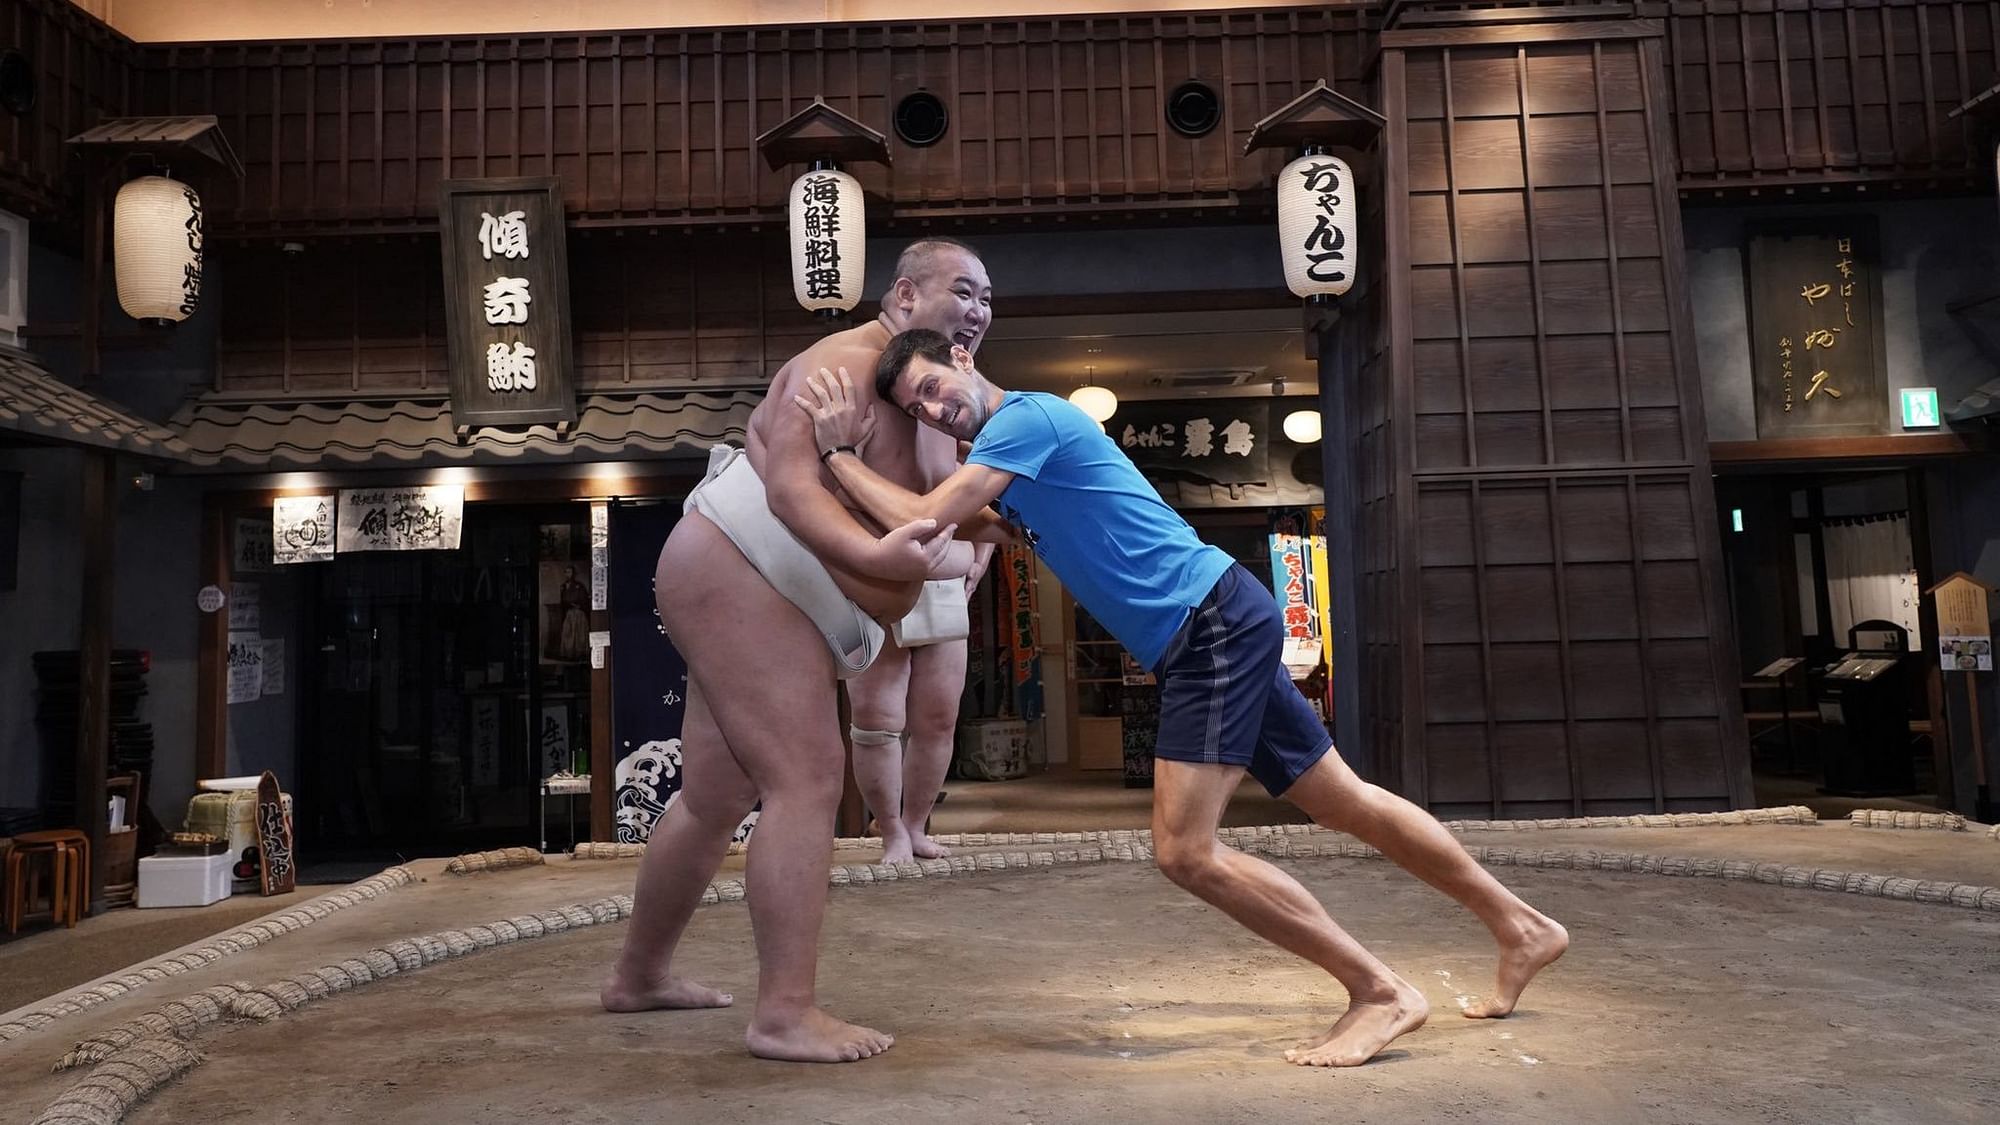 The ancient sport of sumo is a big draw for foreign visitors to Japan.